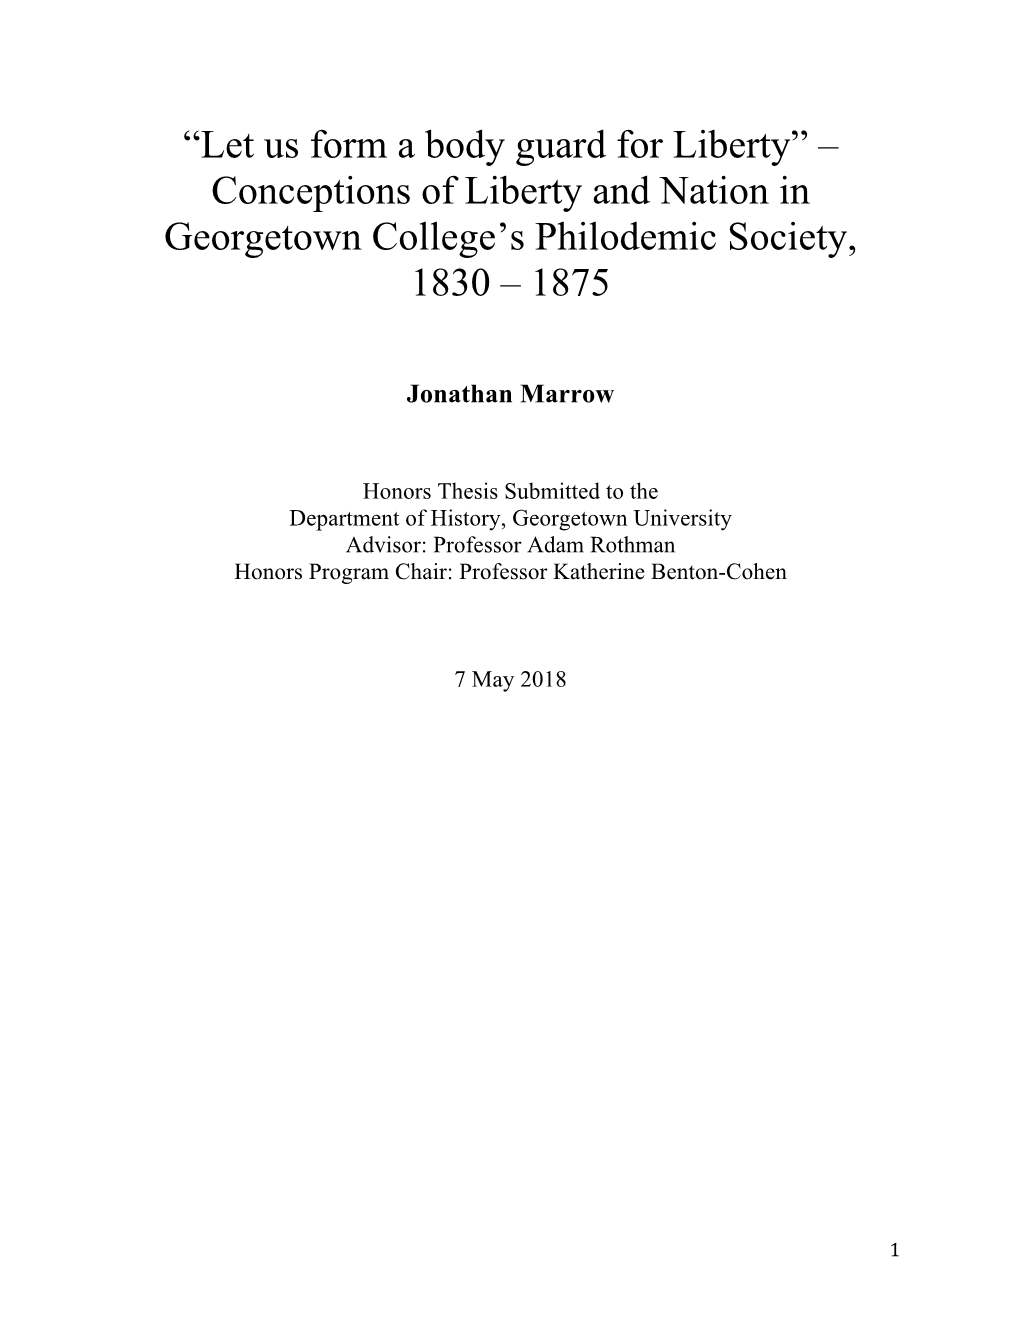 Let Us Form a Body Guard for Liberty” – Conceptions of Liberty and Nation in Georgetown College’S Philodemic Society, 1830 – 1875